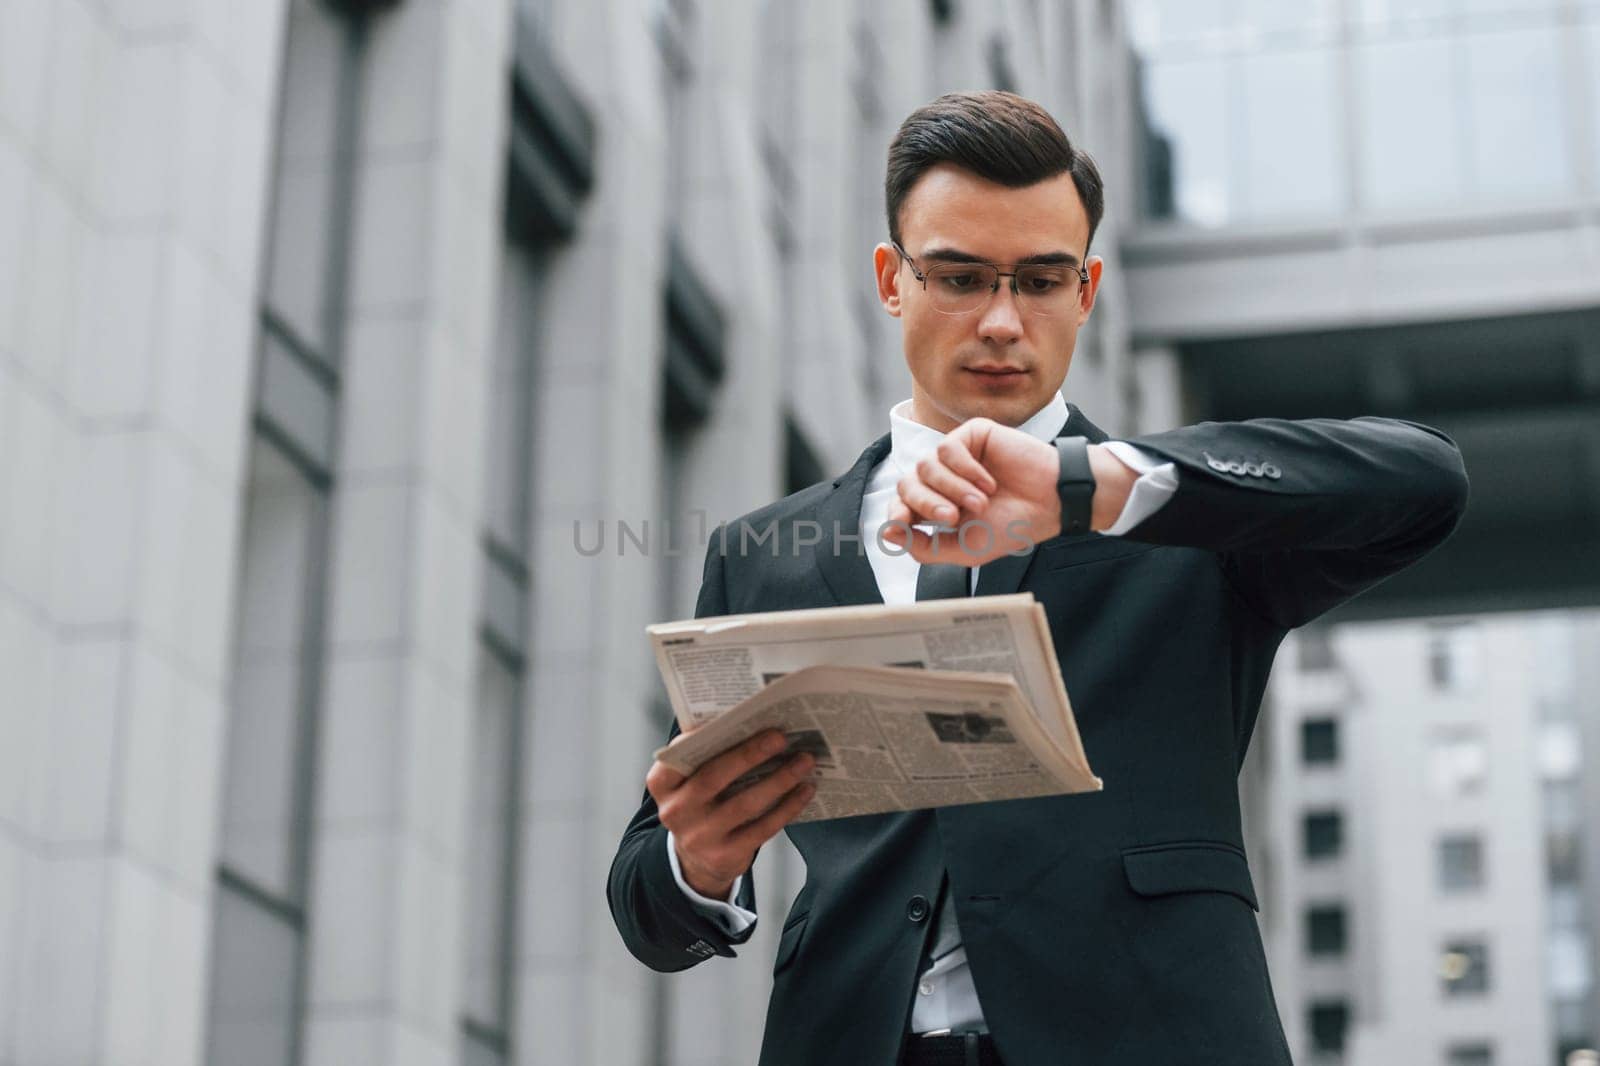 Holding newspaper. Businessman in black suit and tie is outdoors in the city.